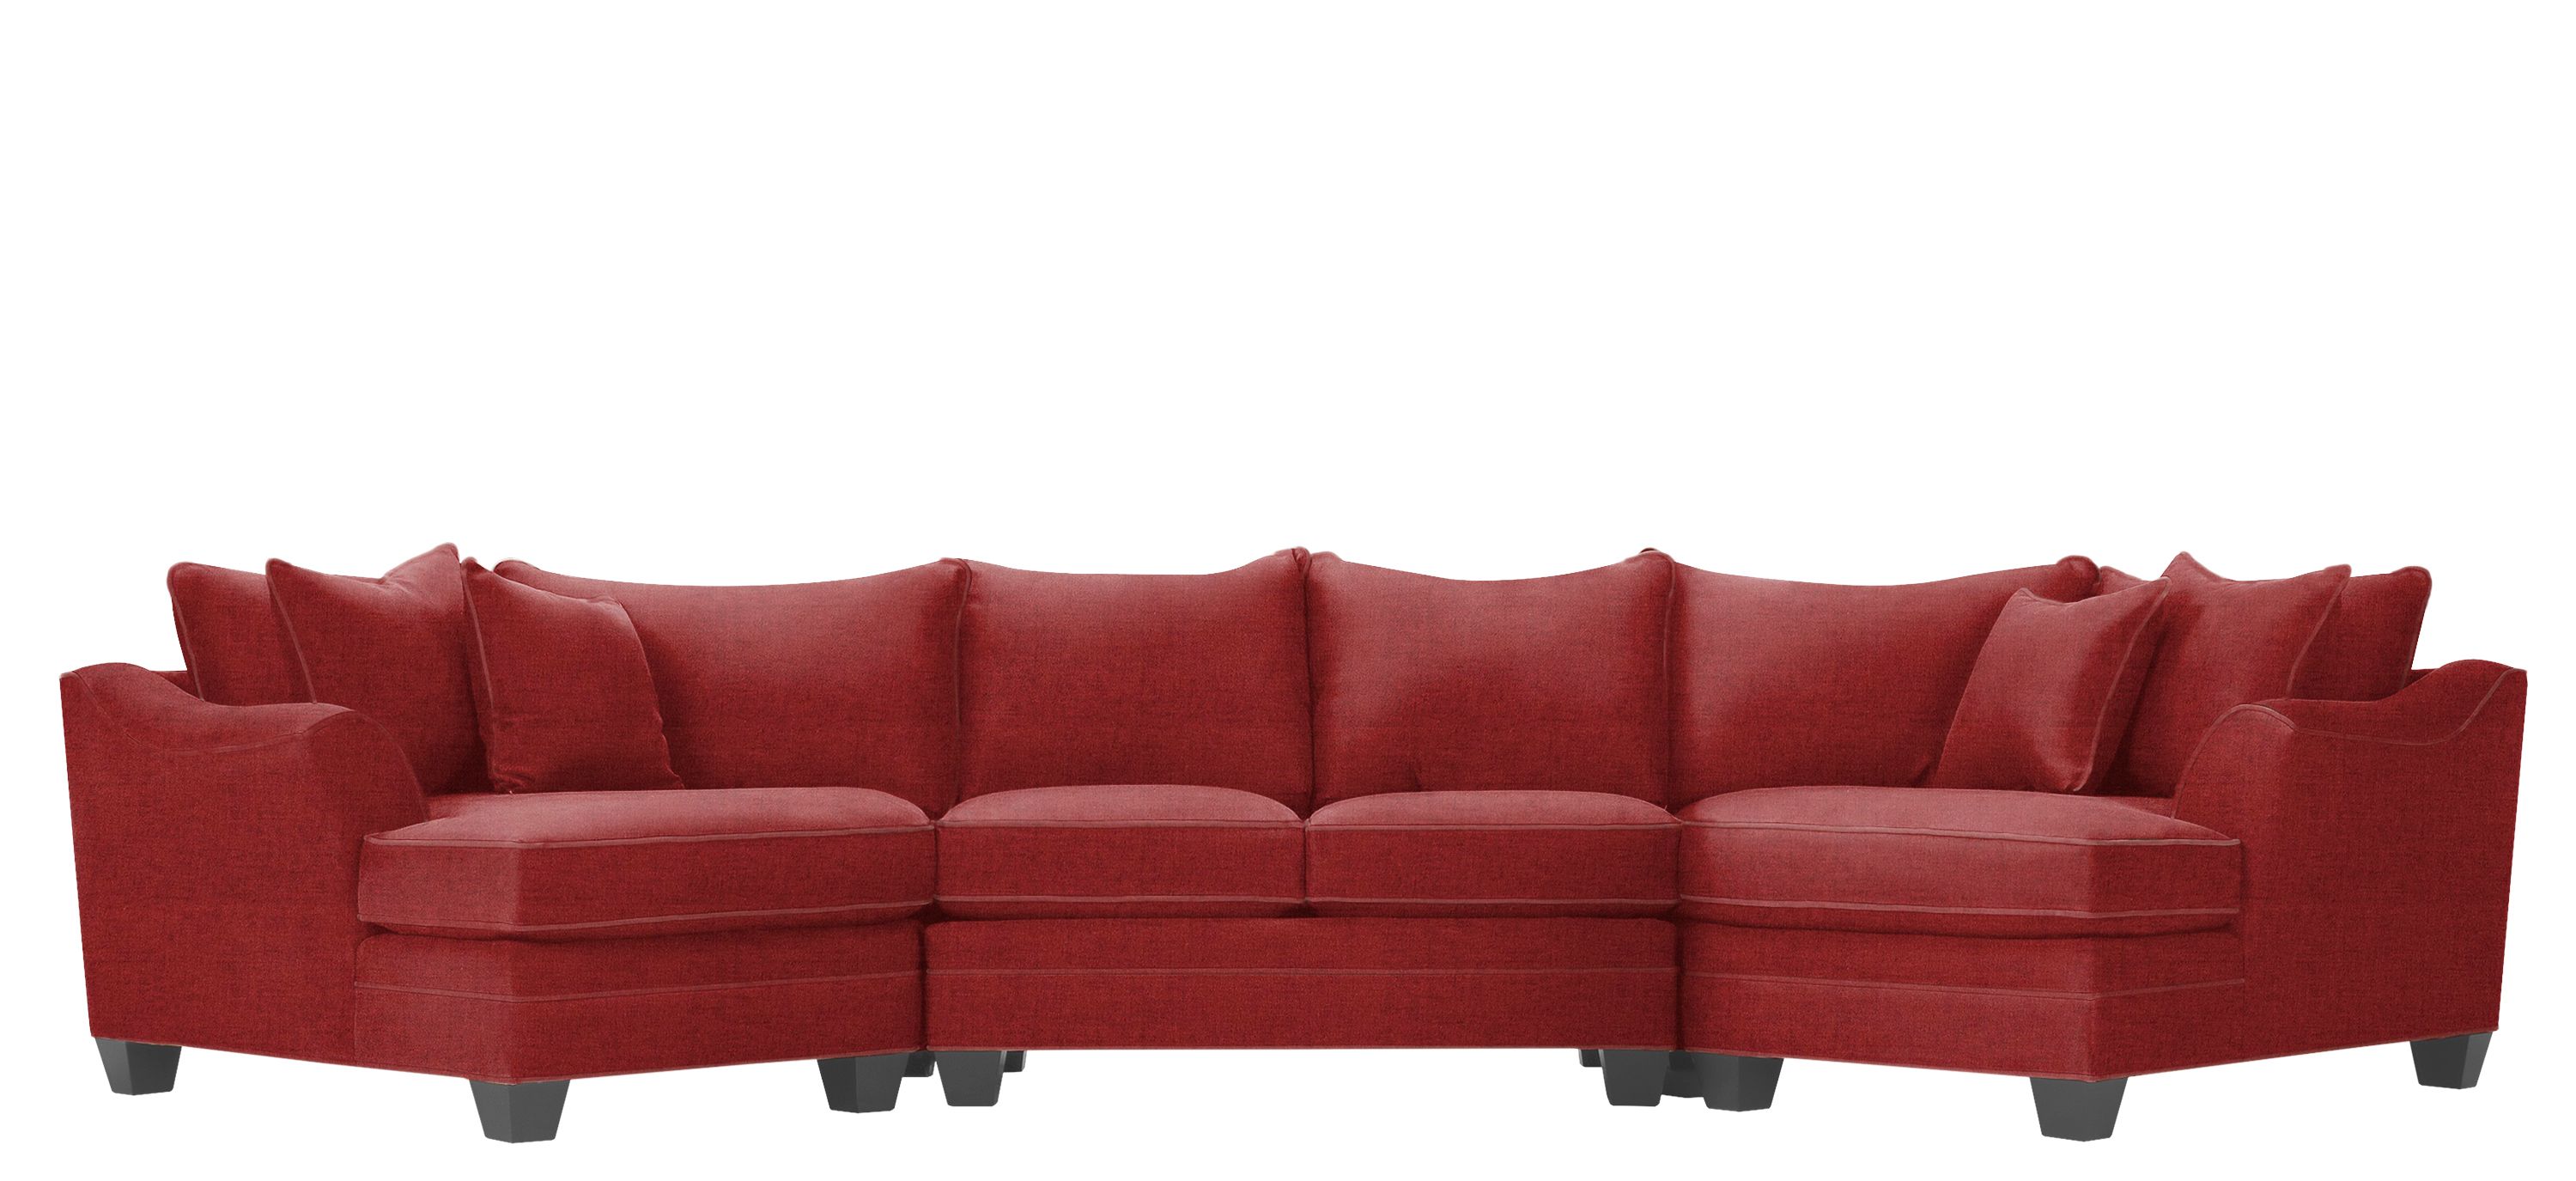 Foresthill 3-pc. Sectional Sofa